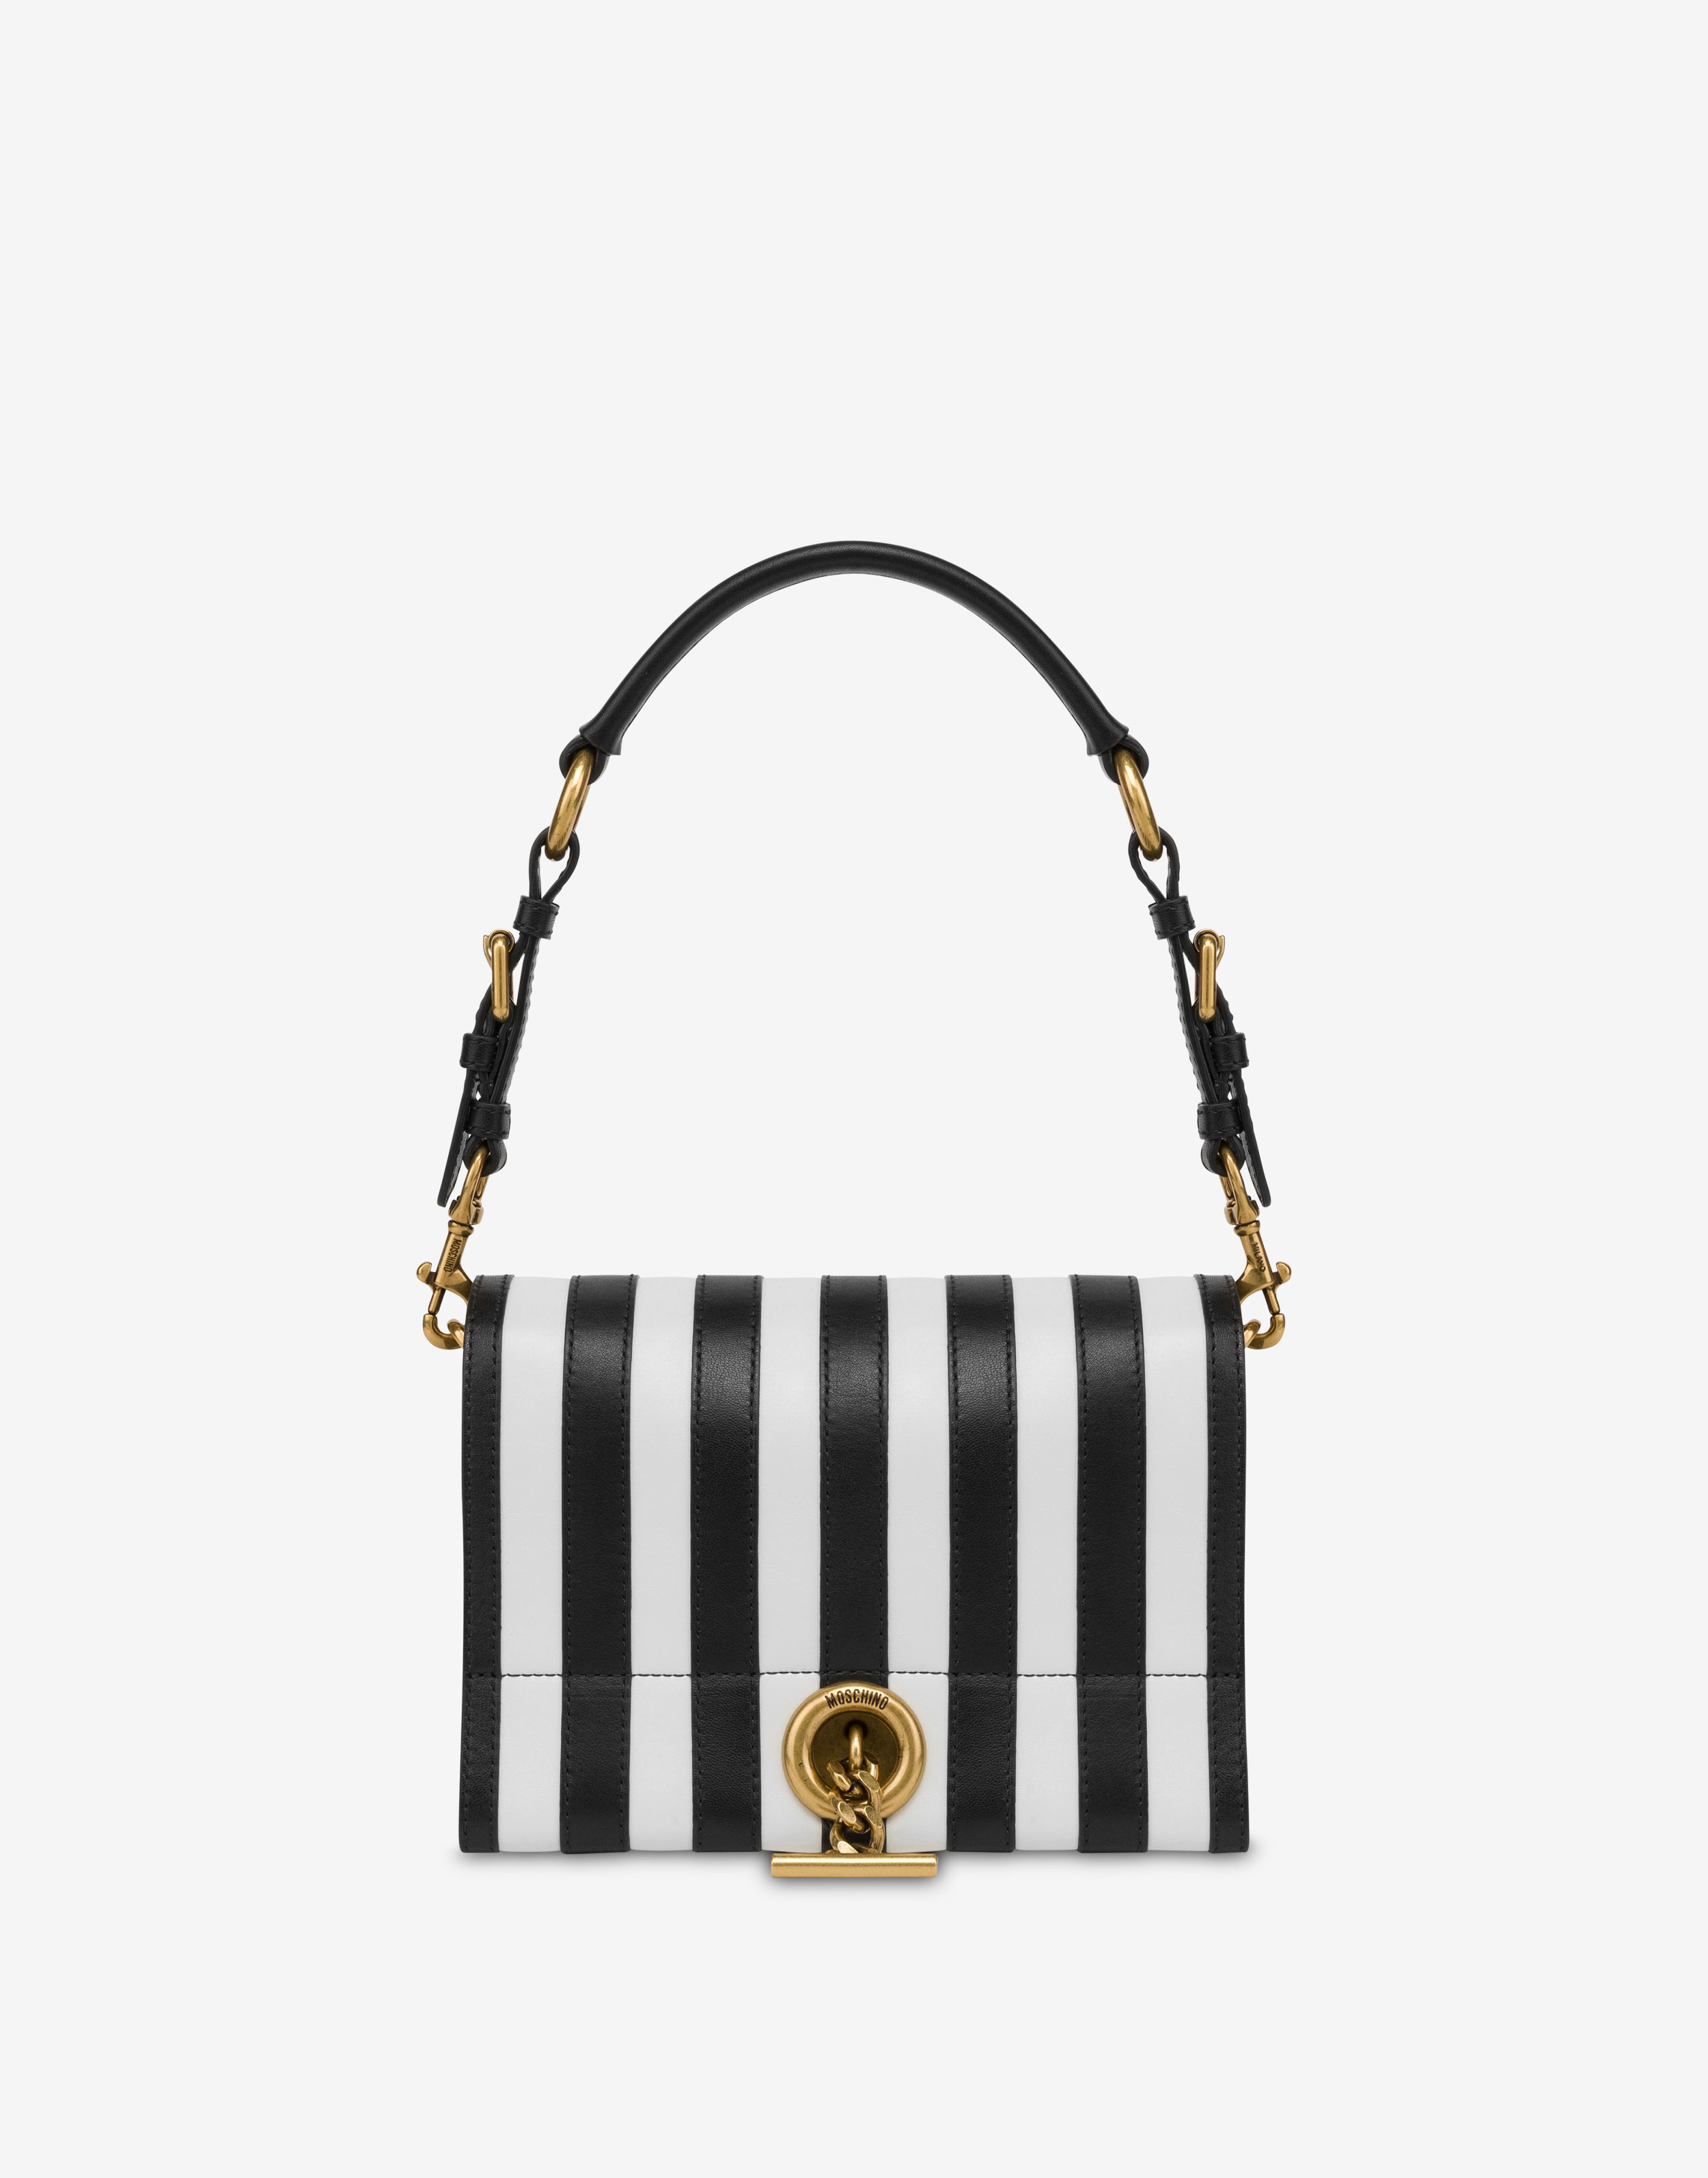 Black and White Striped Purse with High Heel Accents and Tassle Charm. | Striped  purse, Purses, Tassles